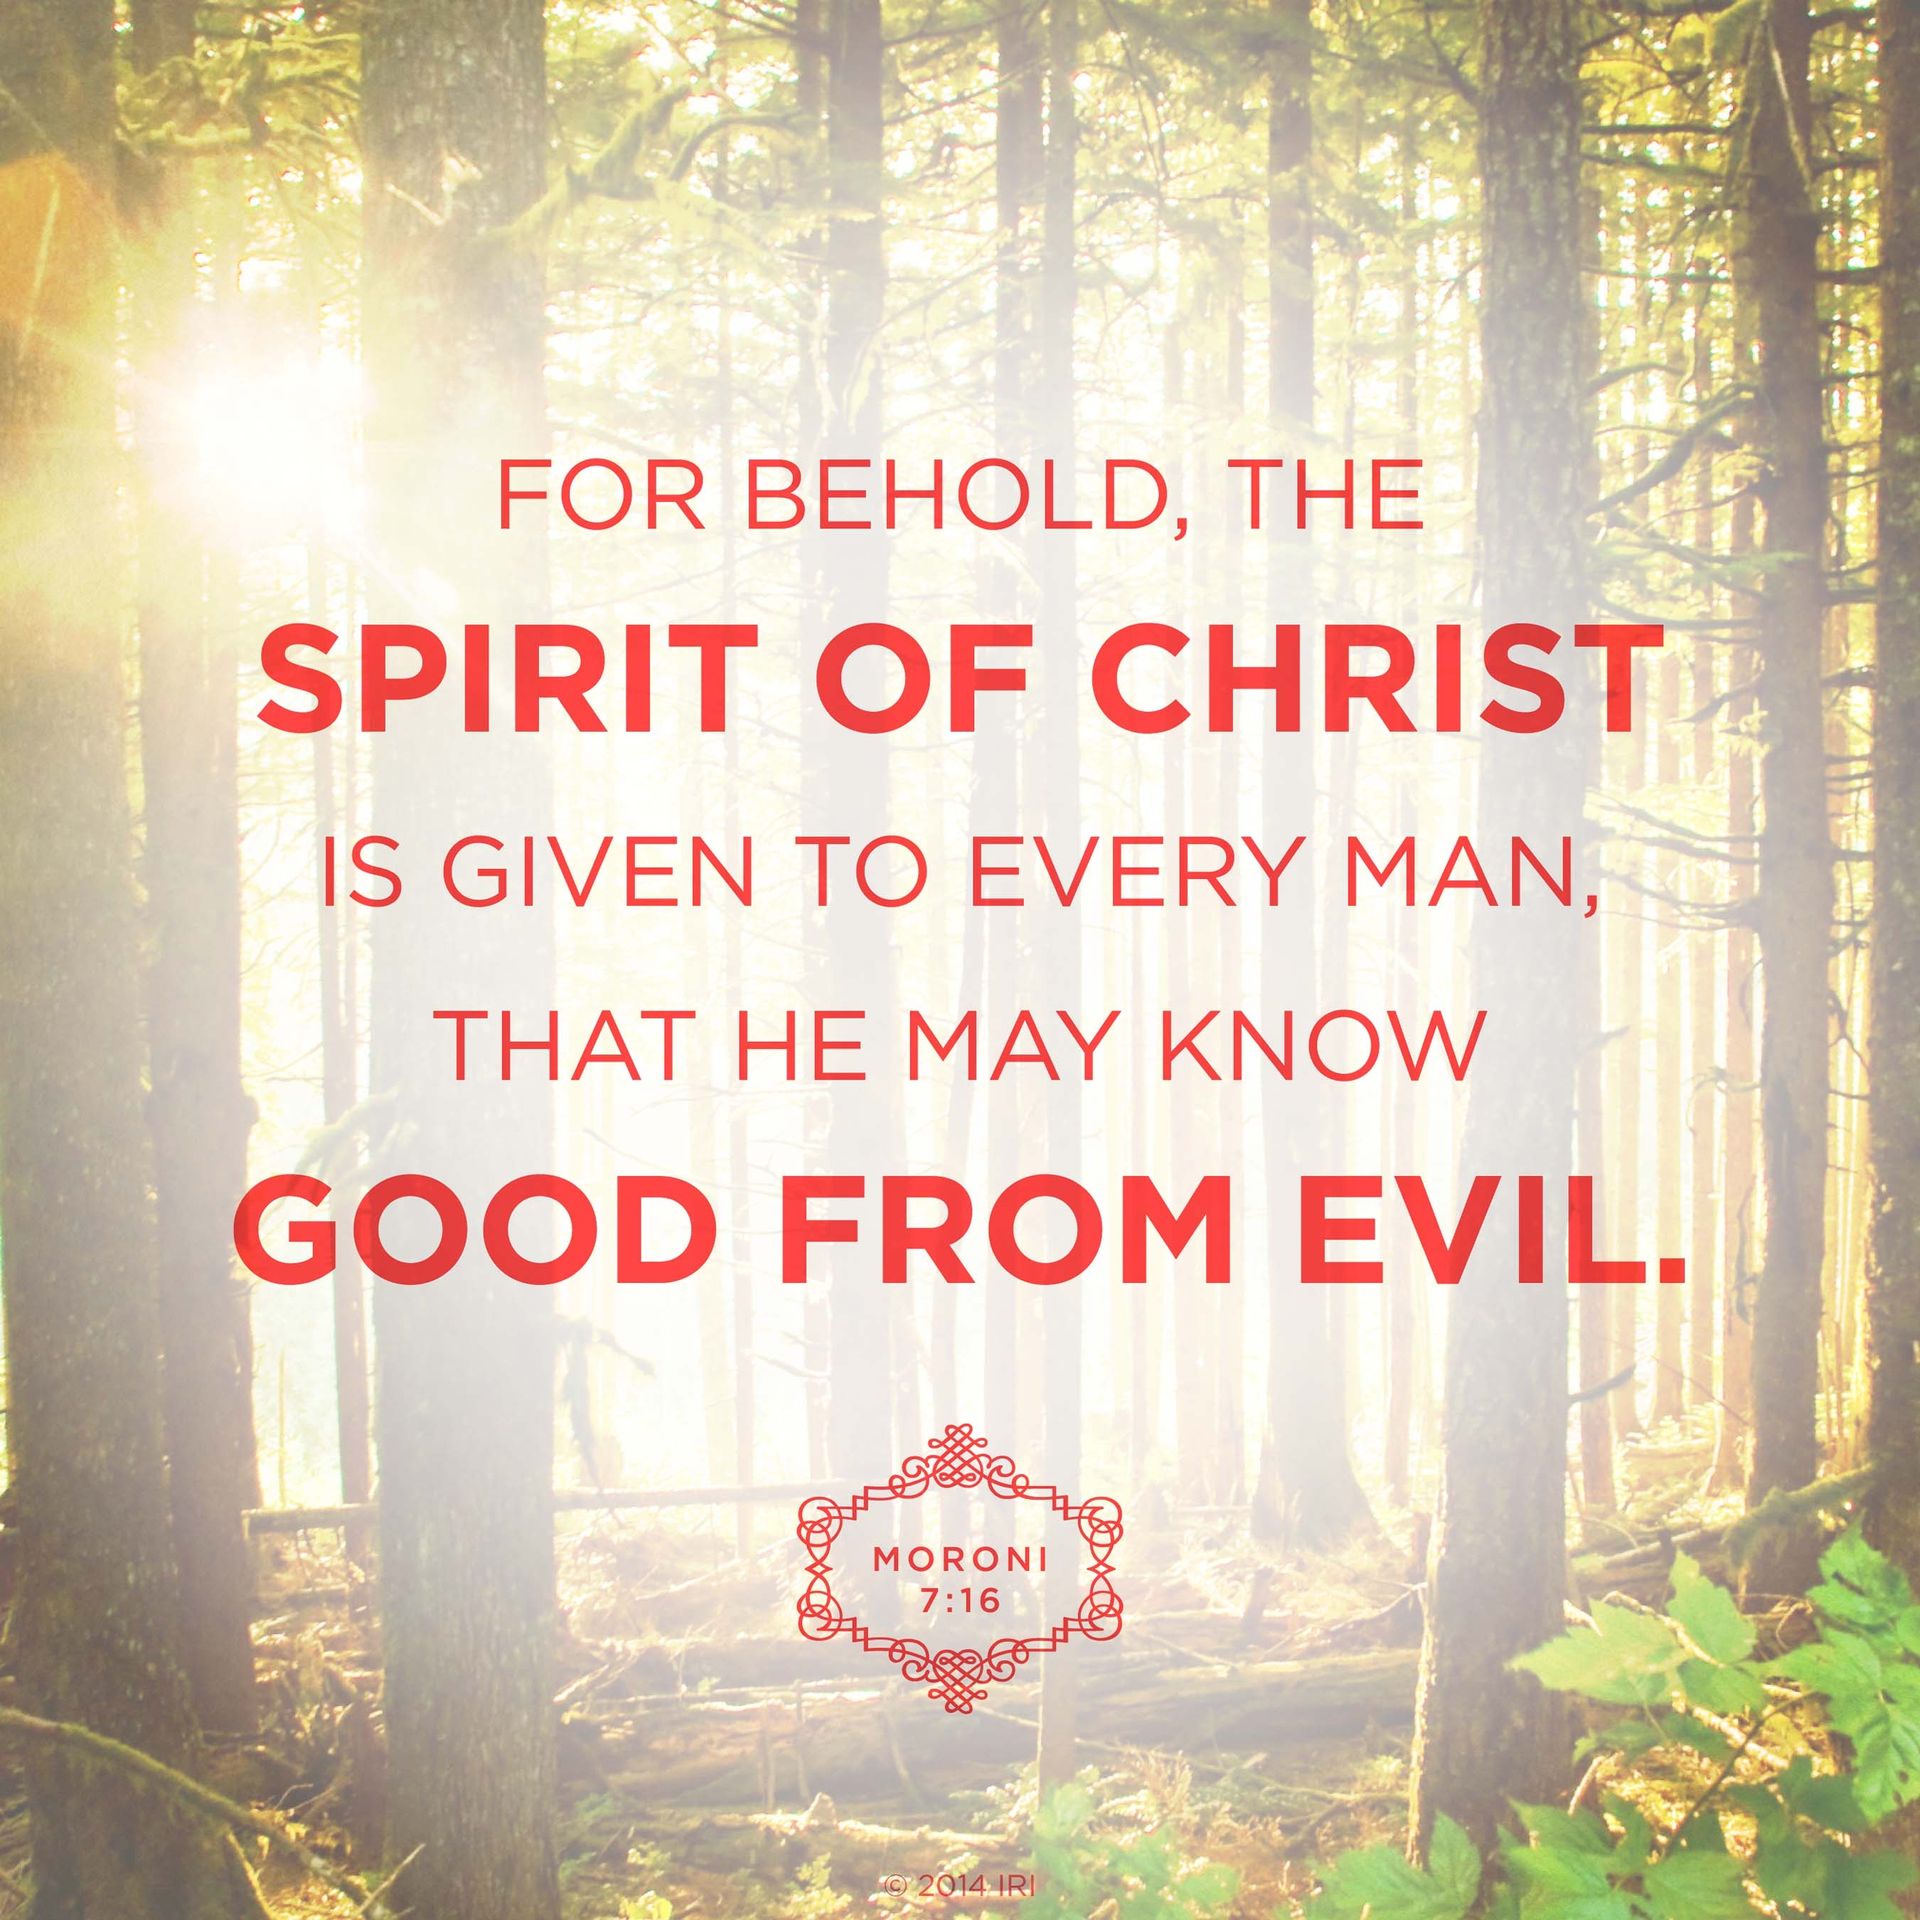 “For behold, the Spirit of Christ is given to every man, that he may know good from evil.”—Moroni 7:16